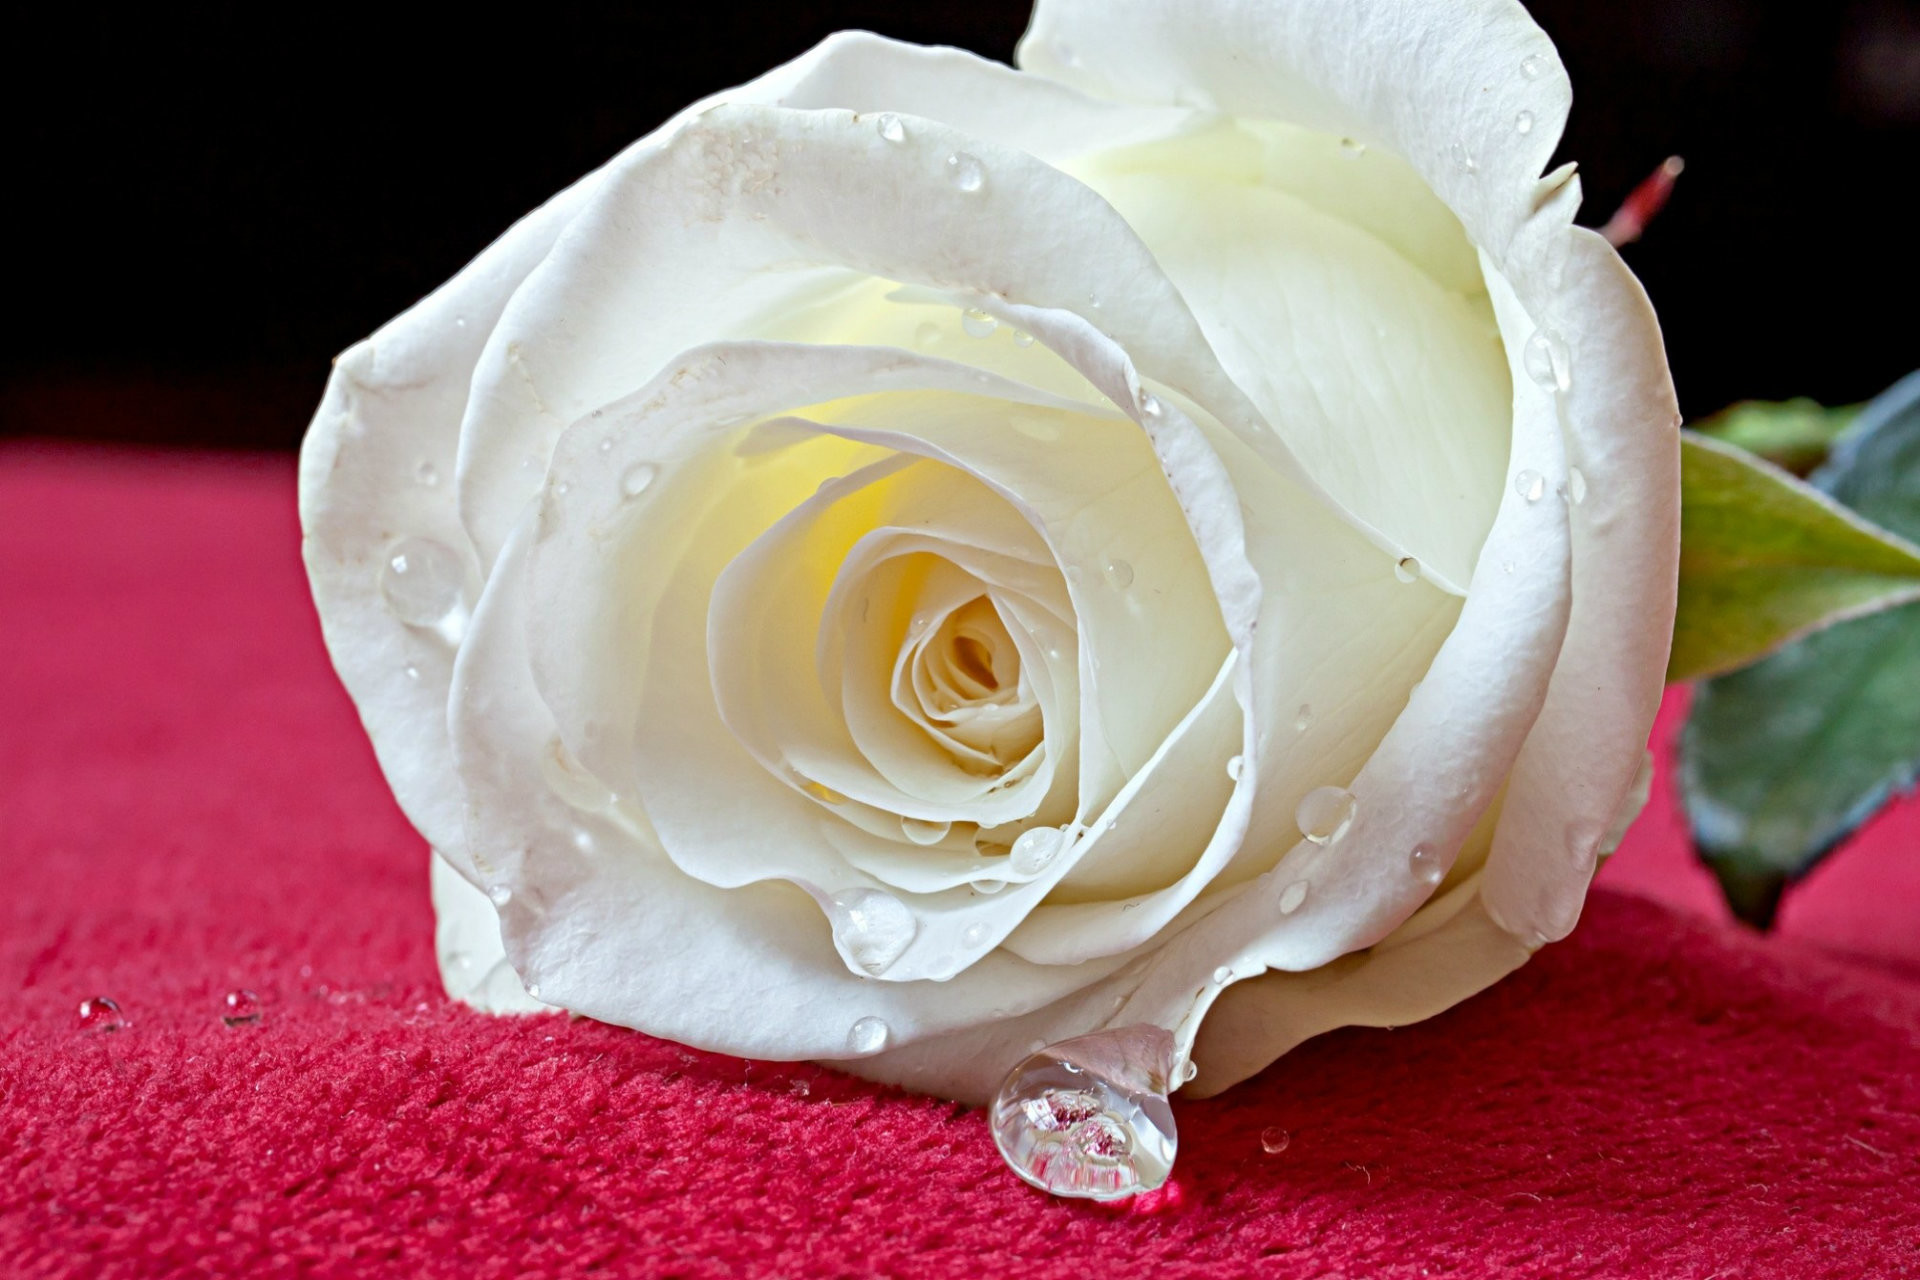 1920x1280 ... Most Beautiful Roses Nature 12 Widescreen Most Beautiful White Rose  High Quality Desktop Image Hd With ...